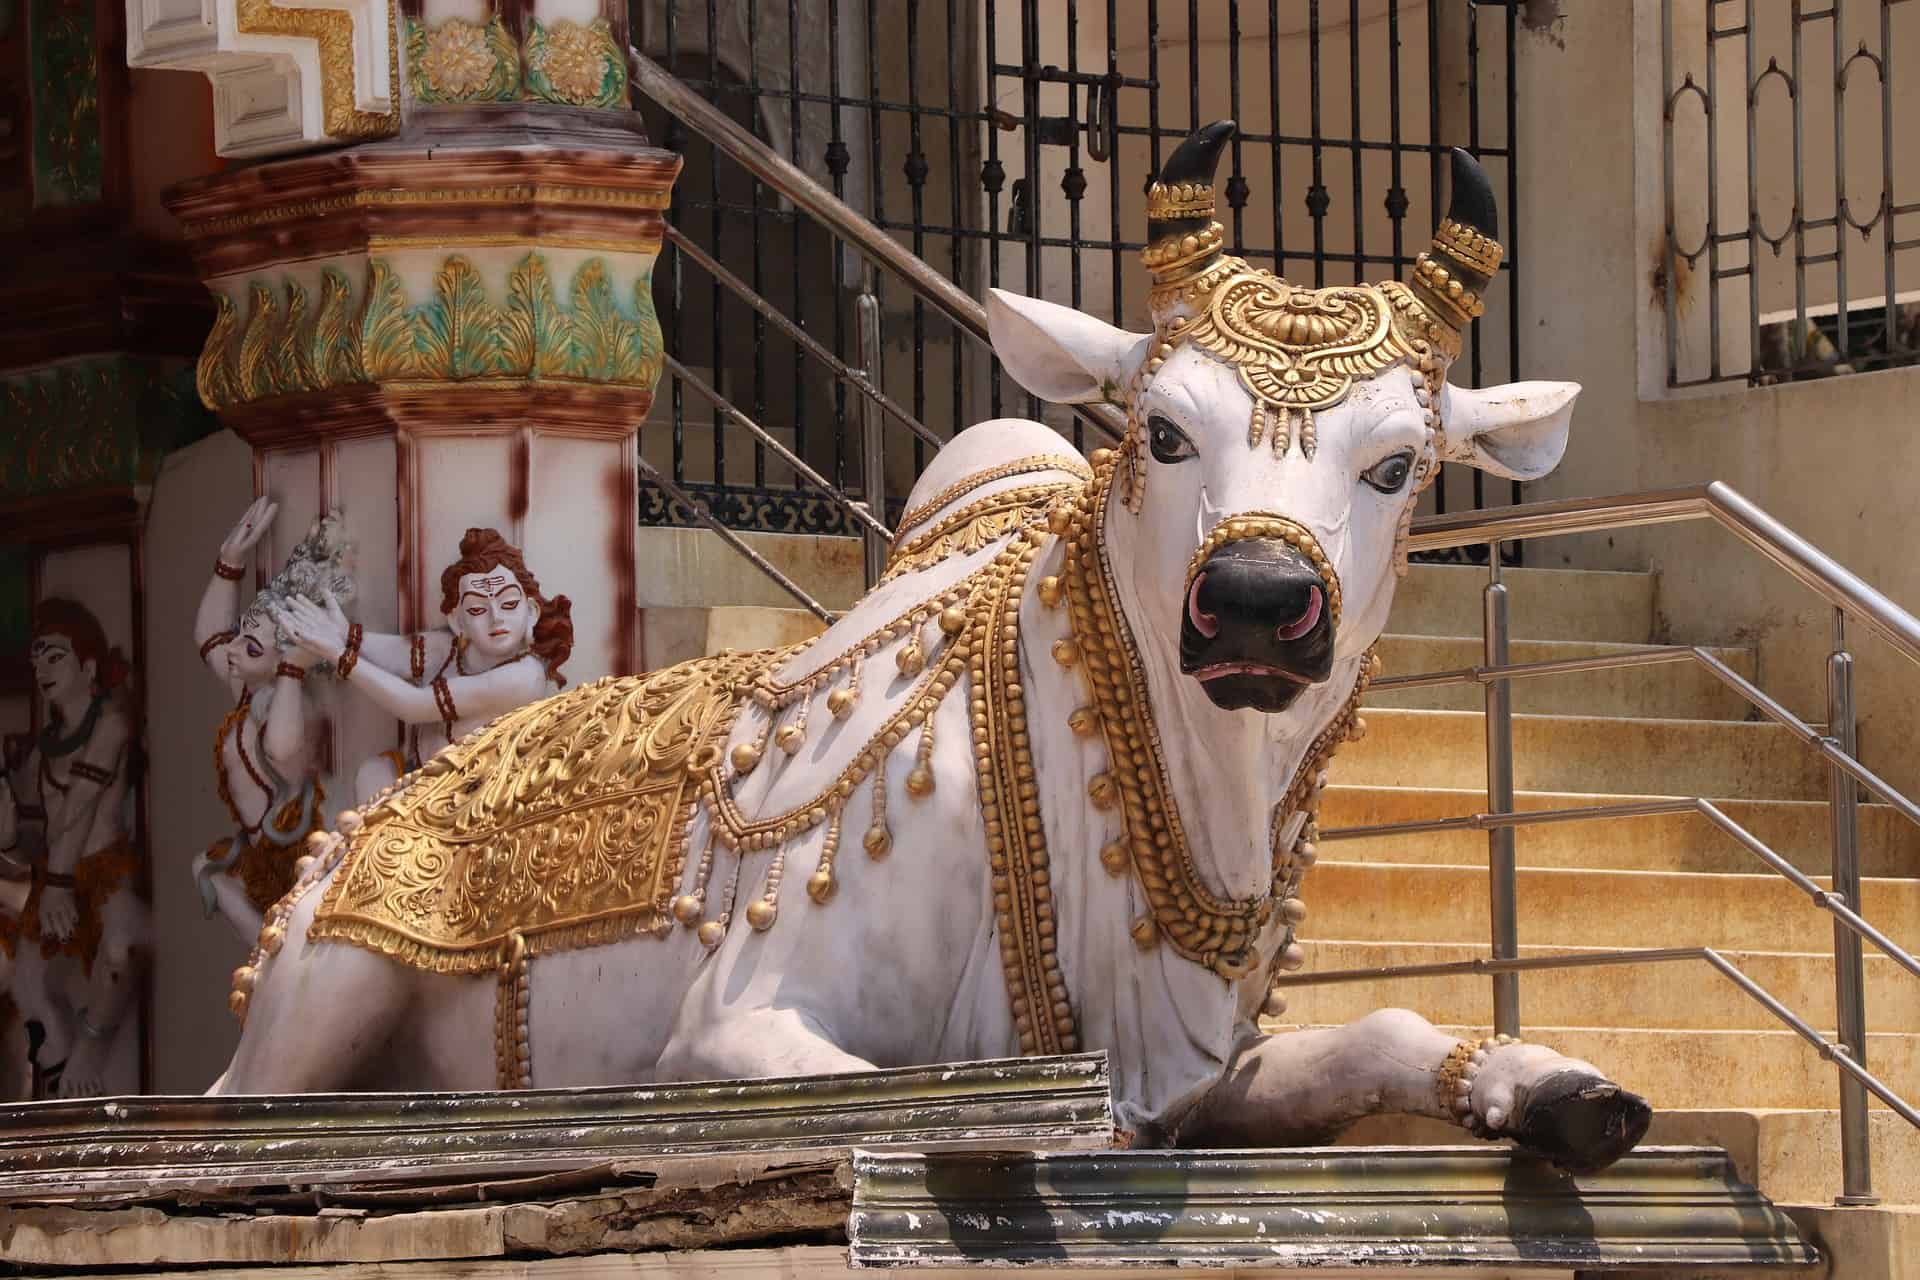 Who is the Hindu god of animals?